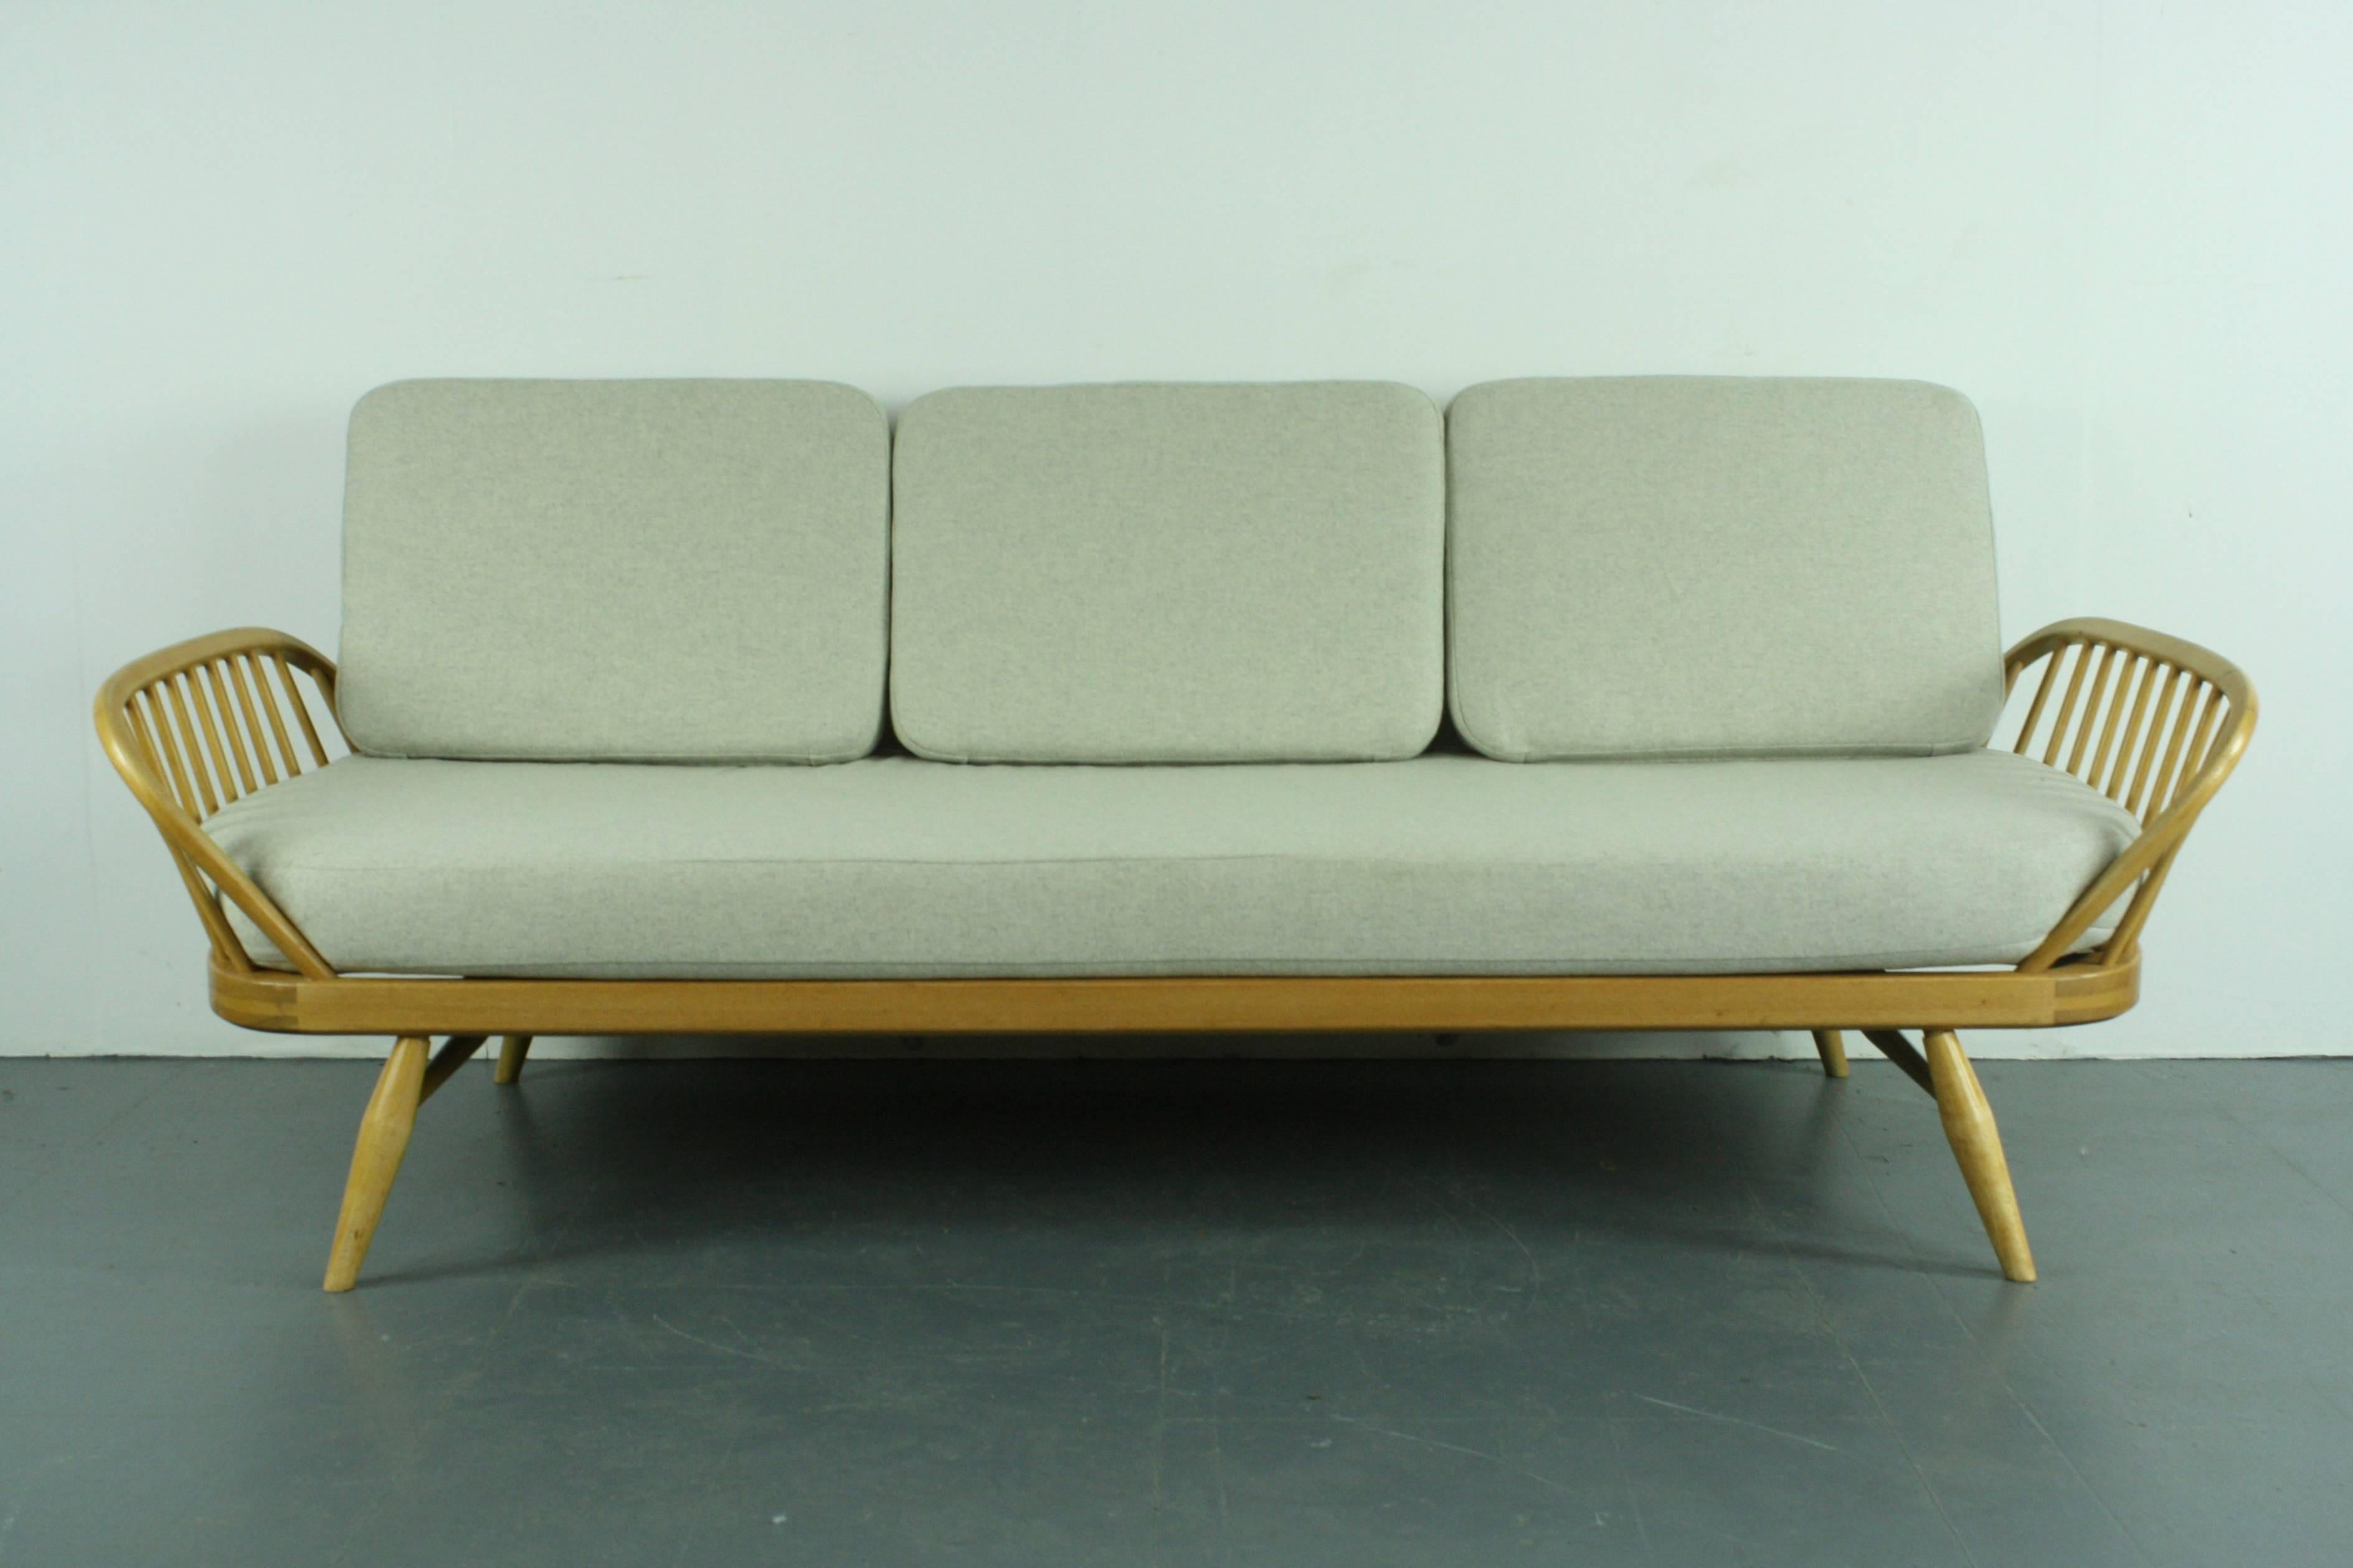 Refurbished vintage Ercol 355 Studio couch or sofa bed.

Inspired by Scandinavian design, the Studio Couch was designed by Lucian Ercolani in 1958 and manufactured by Ercol in the 1960s-1970s.

This is the much sought after blonde (beech)